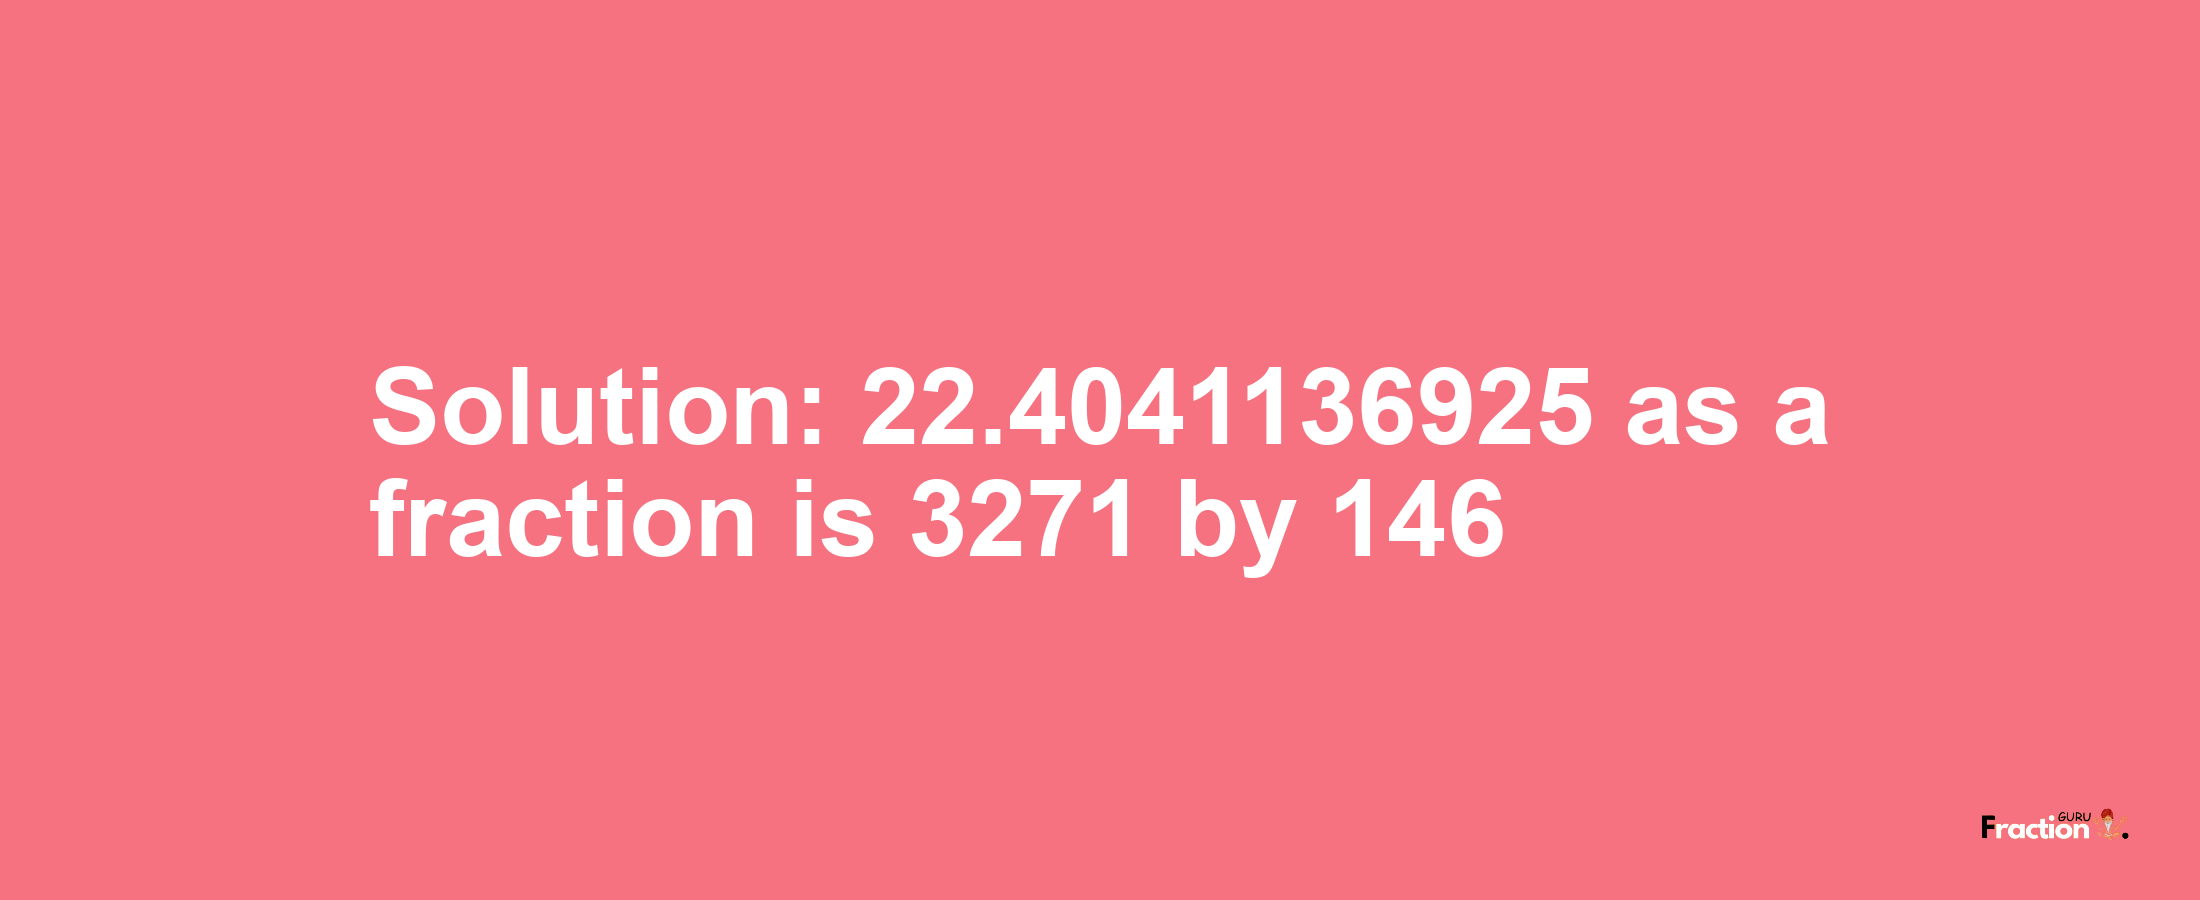 Solution:22.4041136925 as a fraction is 3271/146